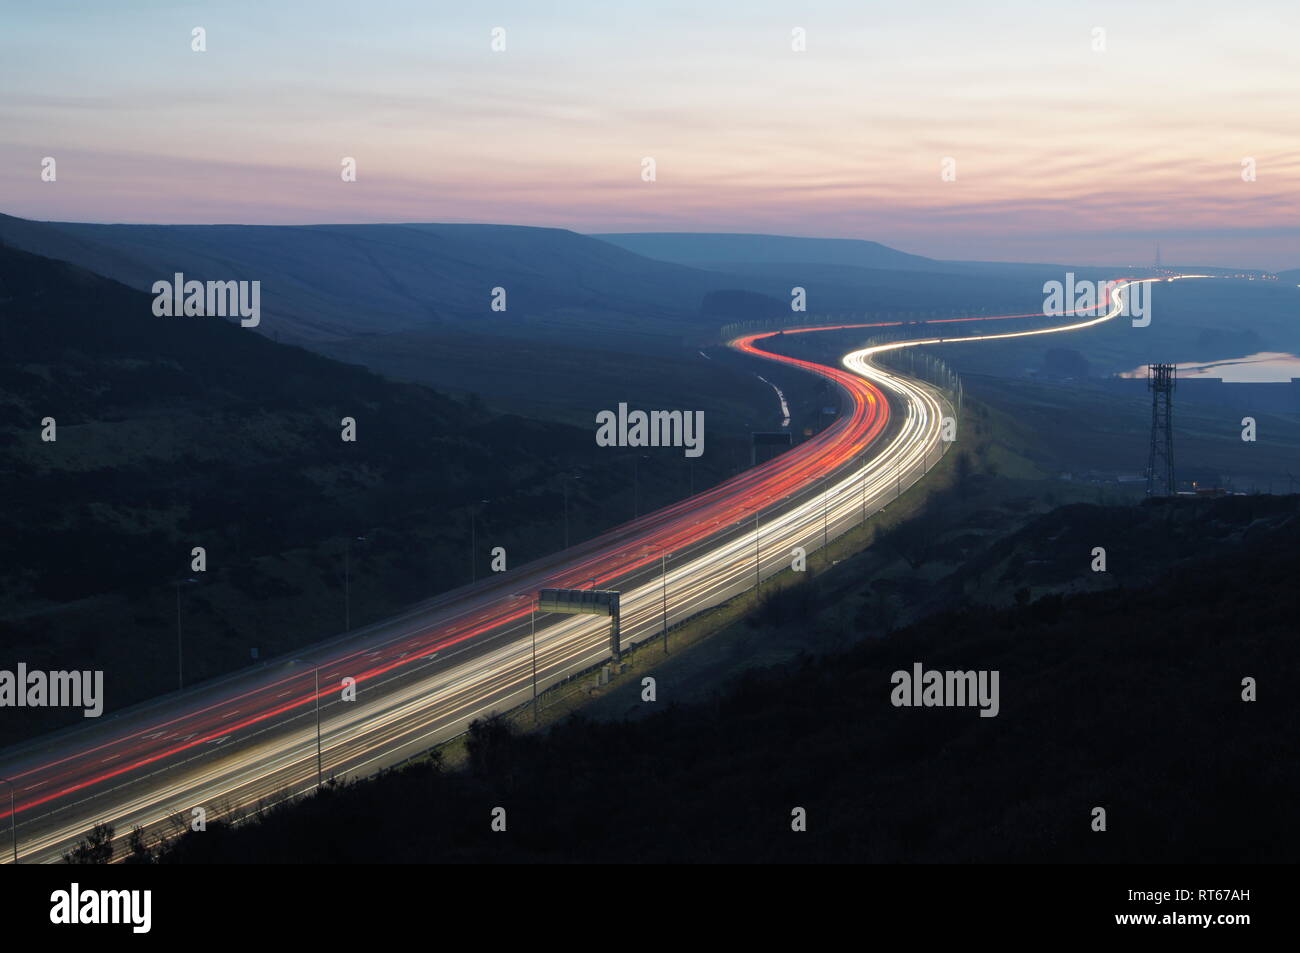 The M62 motorway as seen from Scammonden Bridge, looking westwards towards its highest point at junction 22. M62 summit, view, dusk, light trails. UK Stock Photo